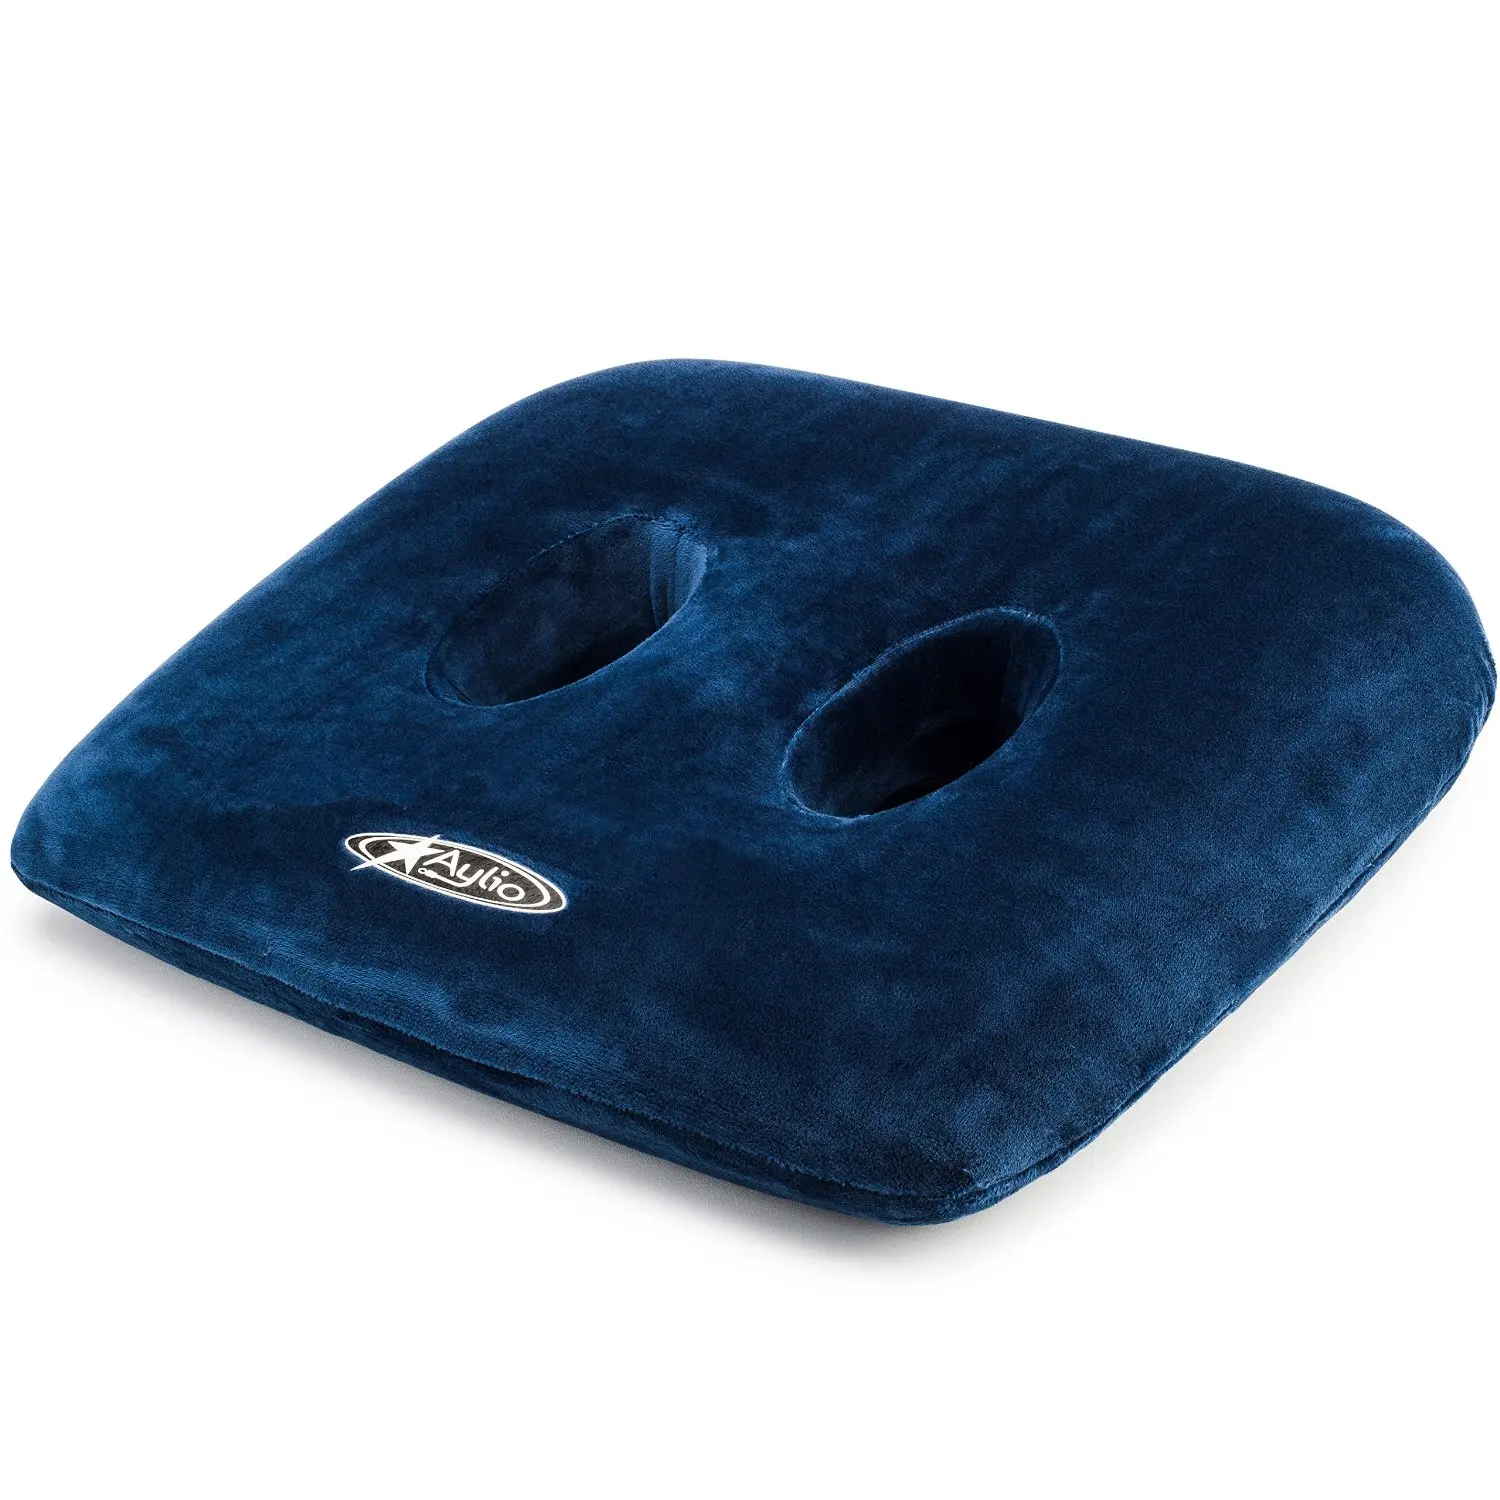 WER Ischial Tuberosity Seat Cushion with Two Holes for Sitting Bones-Washable & Breathable Cover Travelling,TV,Reading,Home,Office,Car 43*36*8/6cm Blue